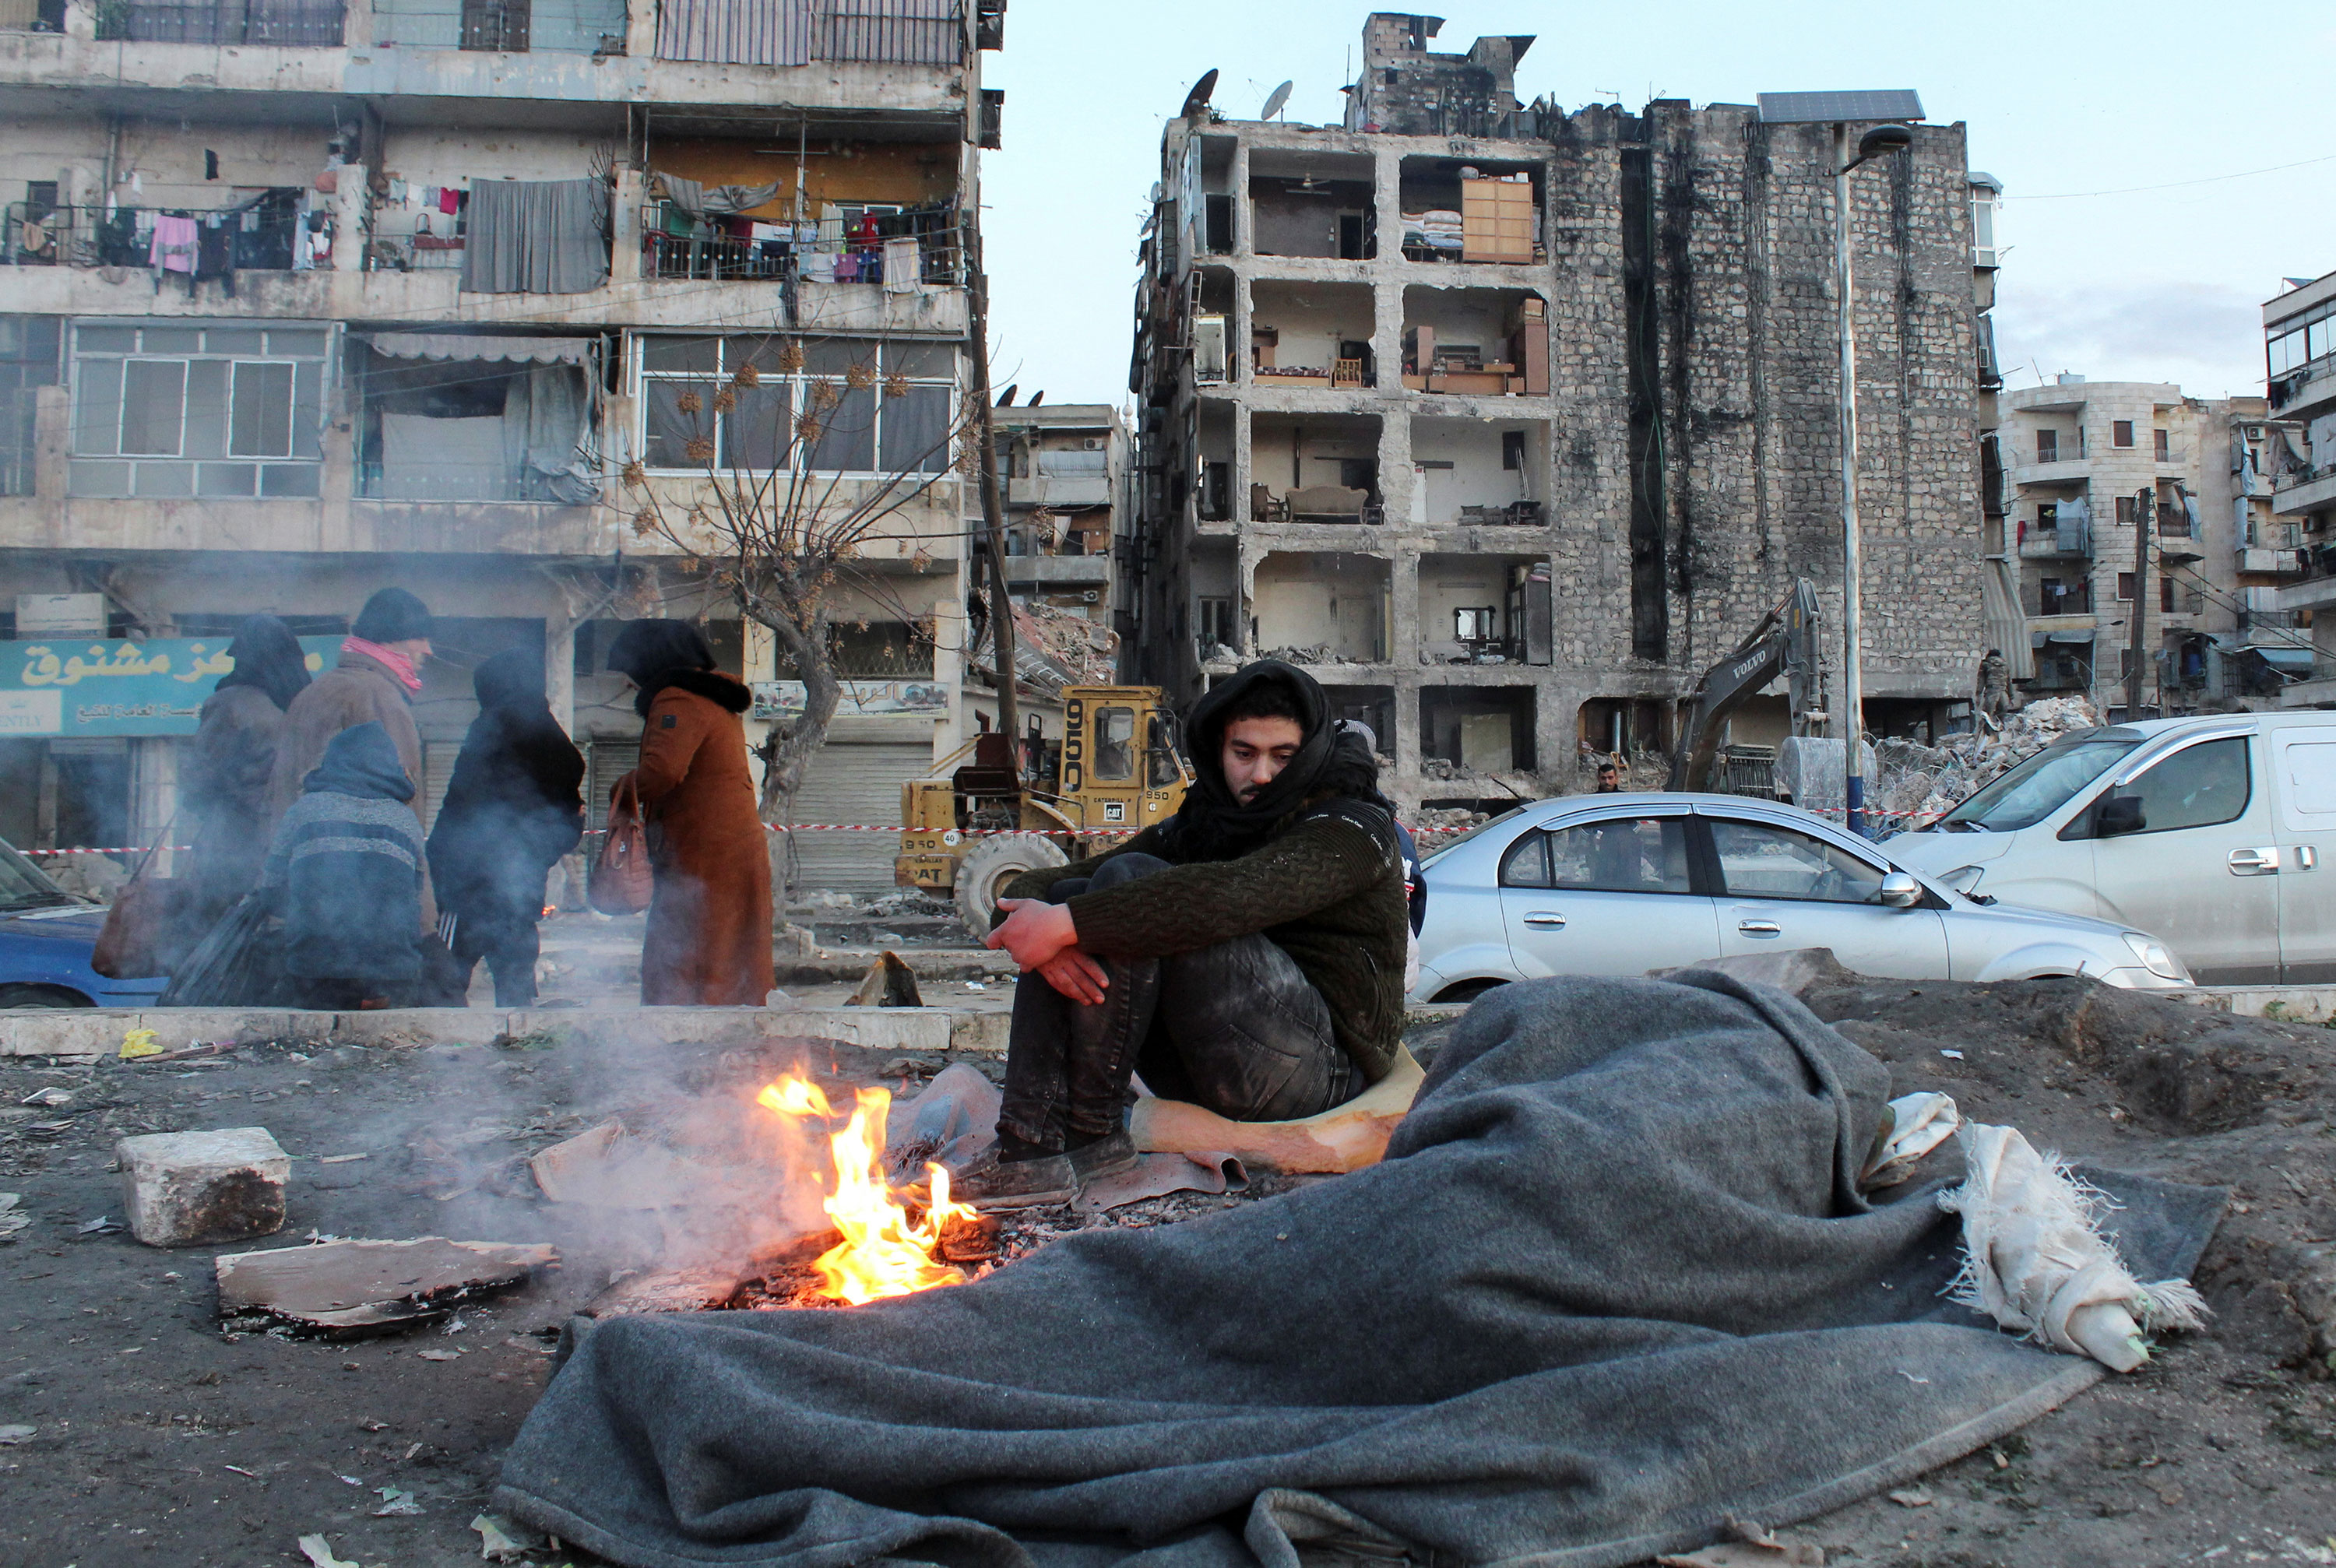 A man who evacuated his home warms up next to a fire on a street in Aleppo, Syria, on Wednesday.